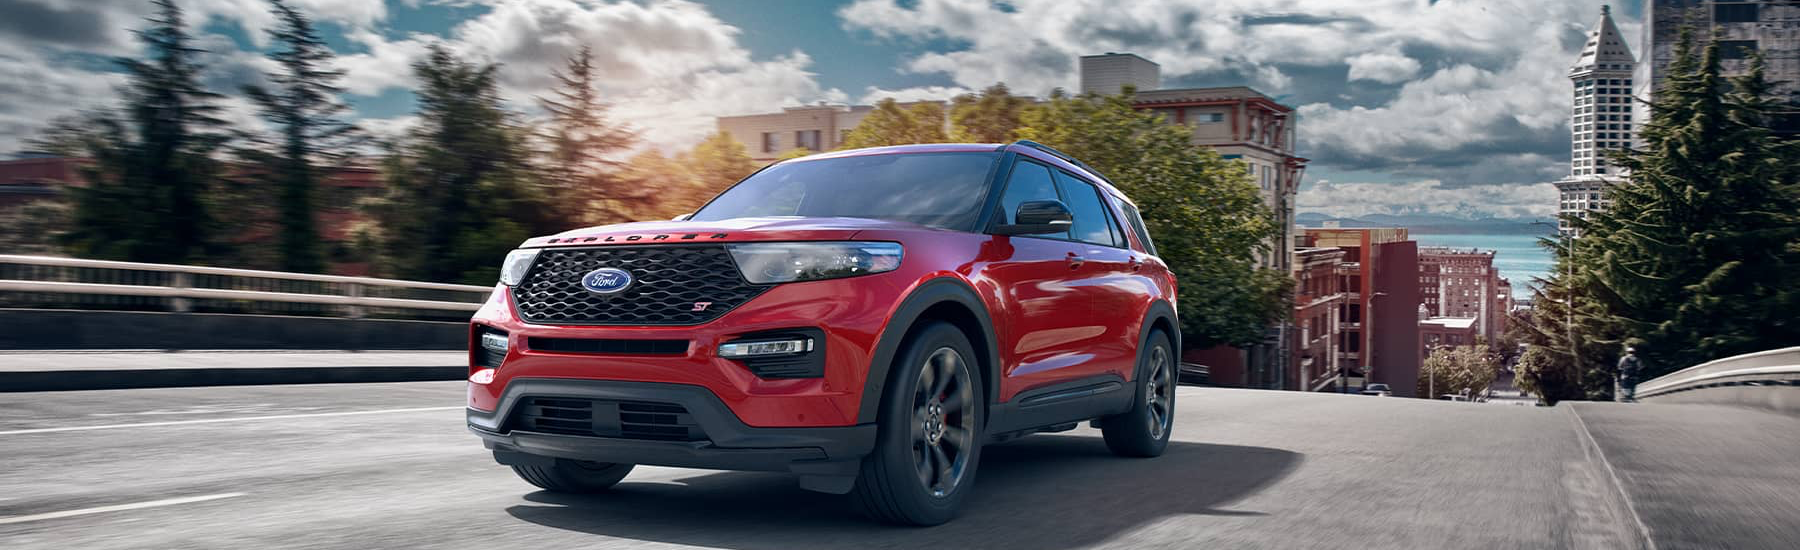 Red 2021 Ford Explorer driving up a hill out of a city